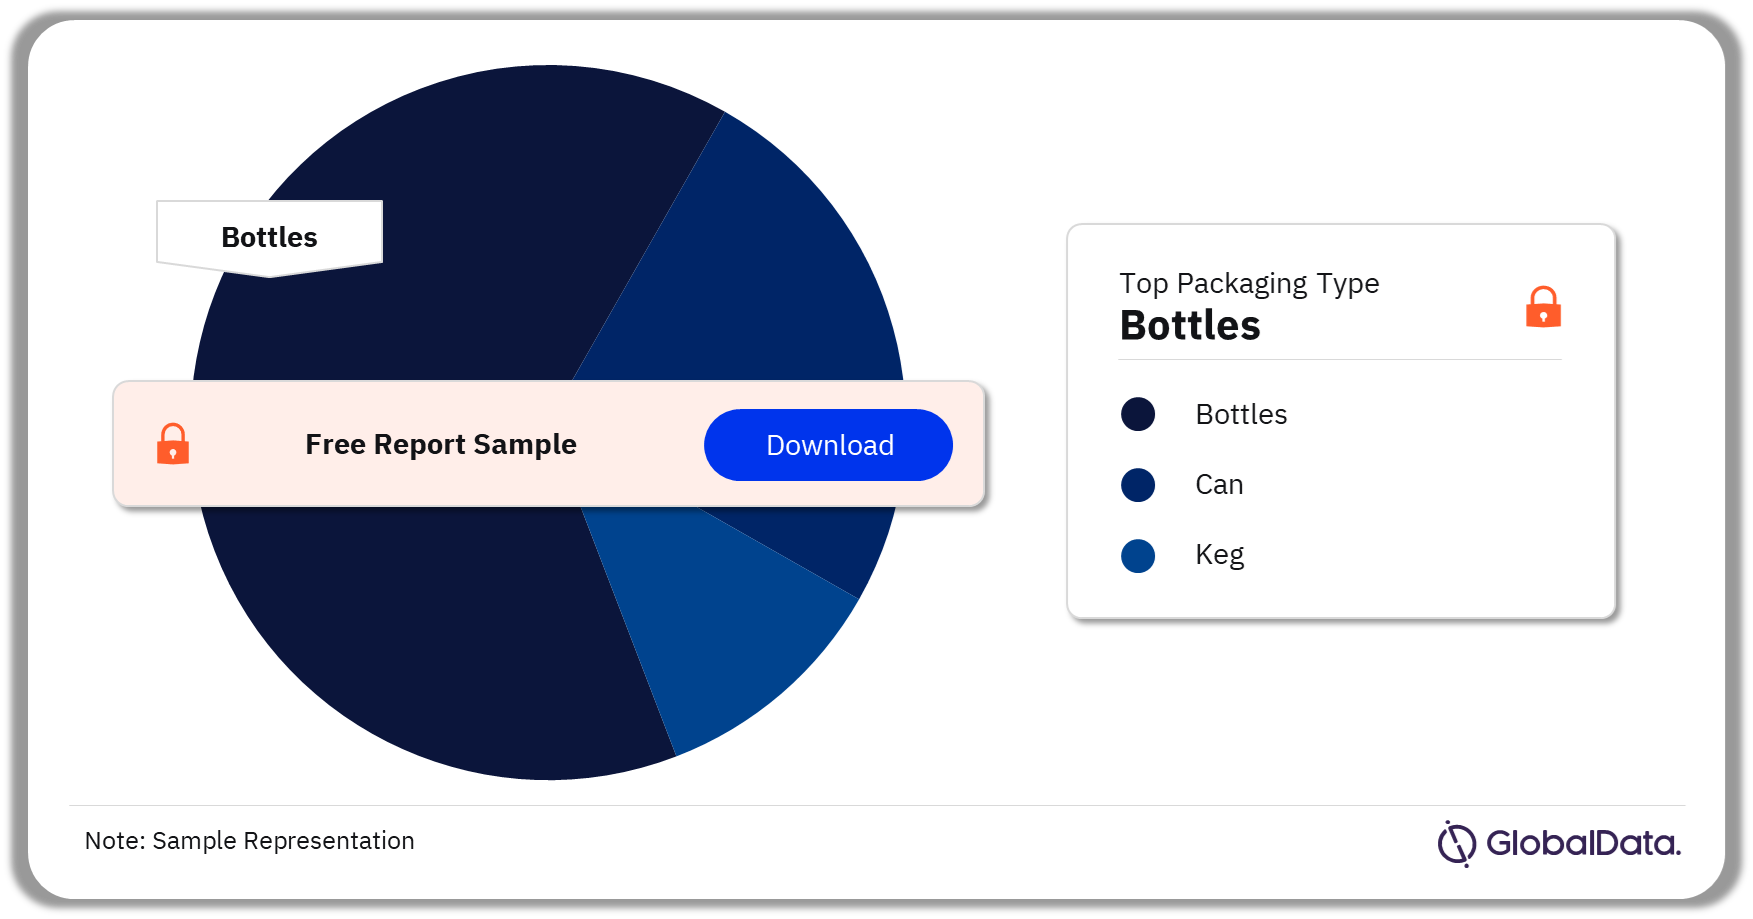 Croatia Beer and Cider Market Analysis by Packaging Types, 2022 (%)